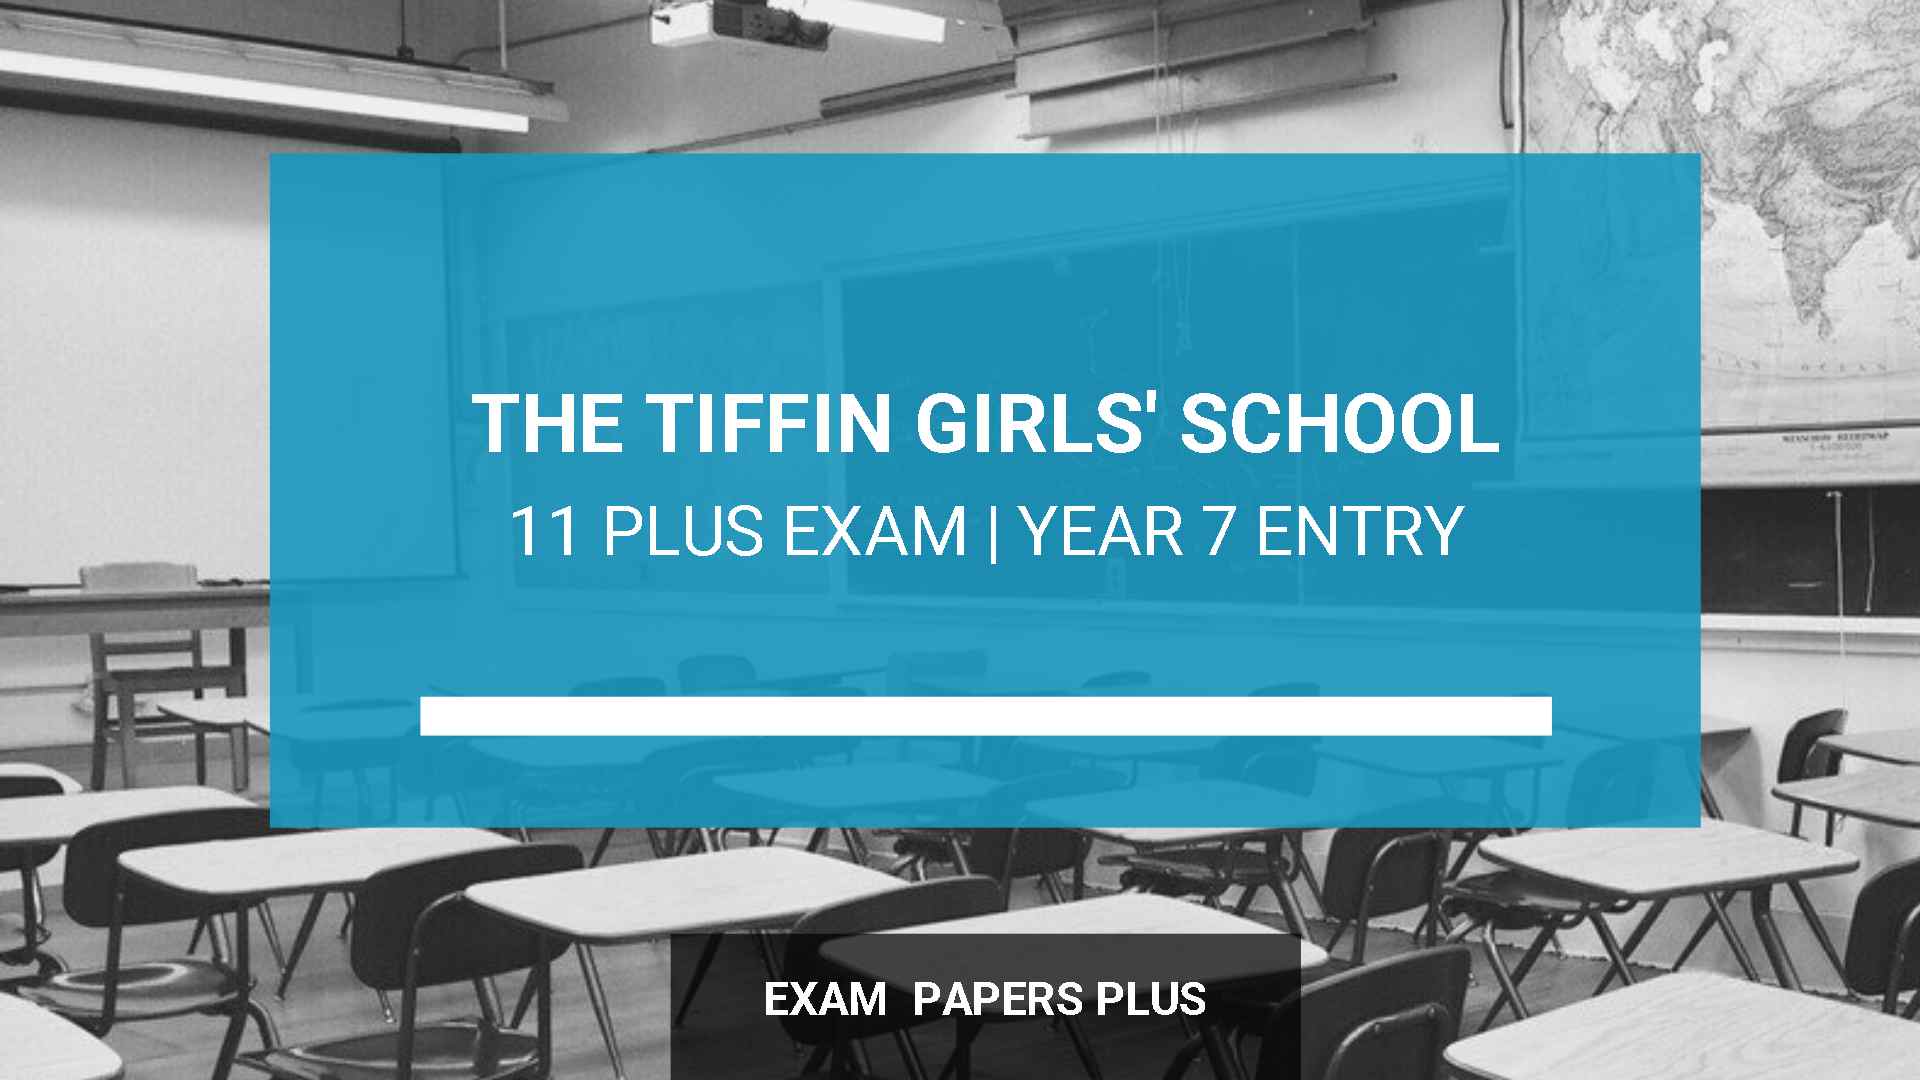 The Tiffin Girls School 11 Plus Exam For Year 7 Entry Key Details